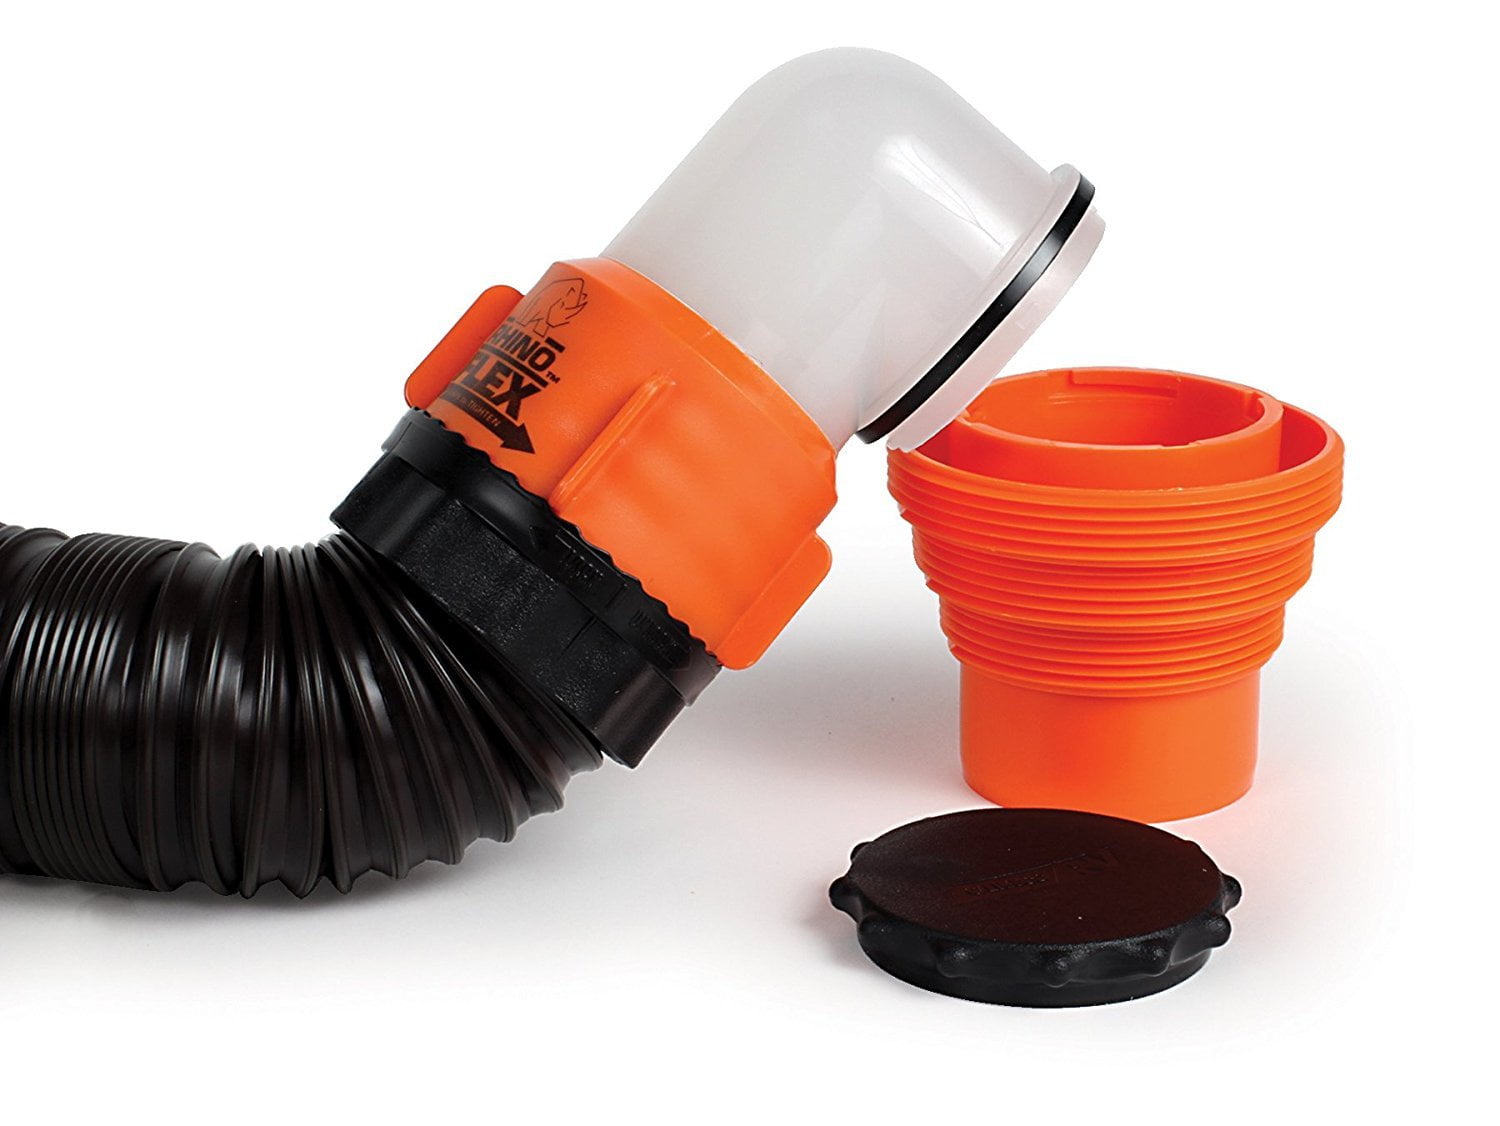 Camco RhinoFLEX 15ft RV Sewer Hose Kit, Includes Swivel Fitting